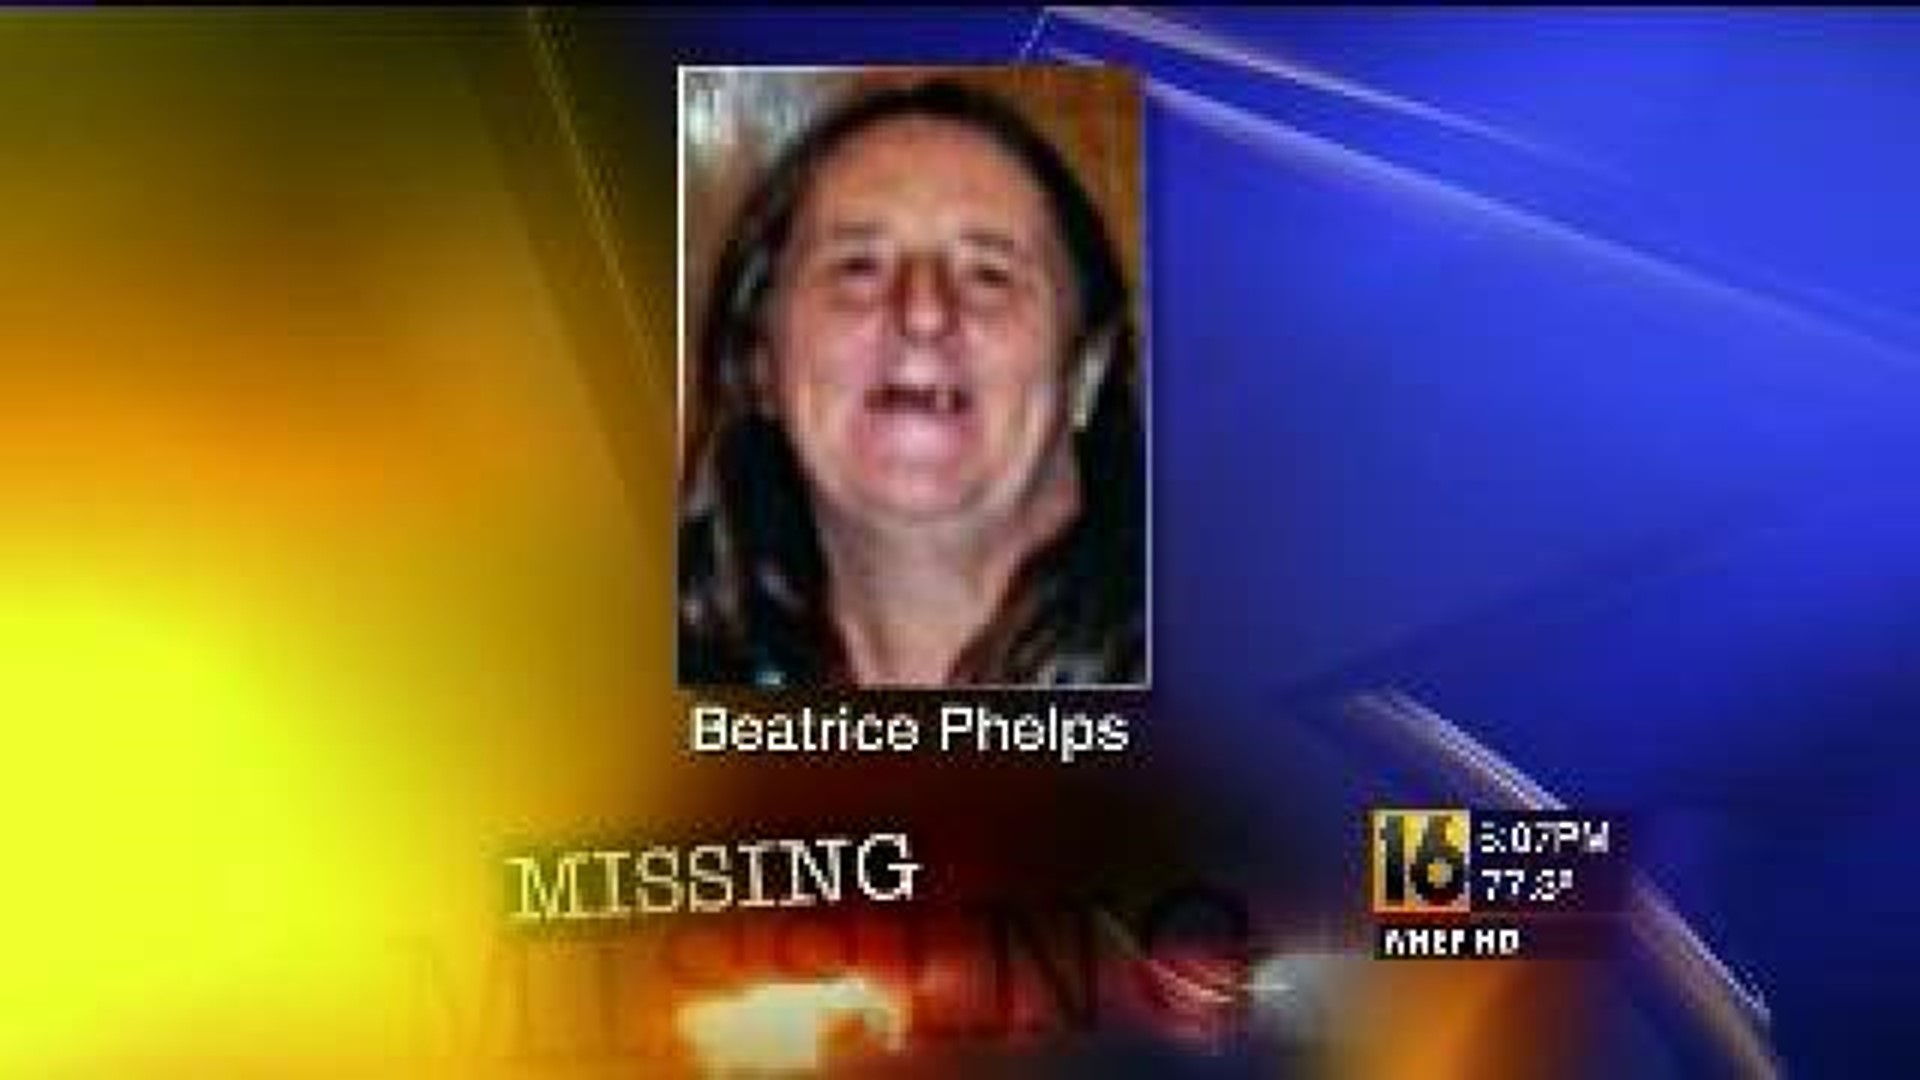 Search for Missing New Milford Woman